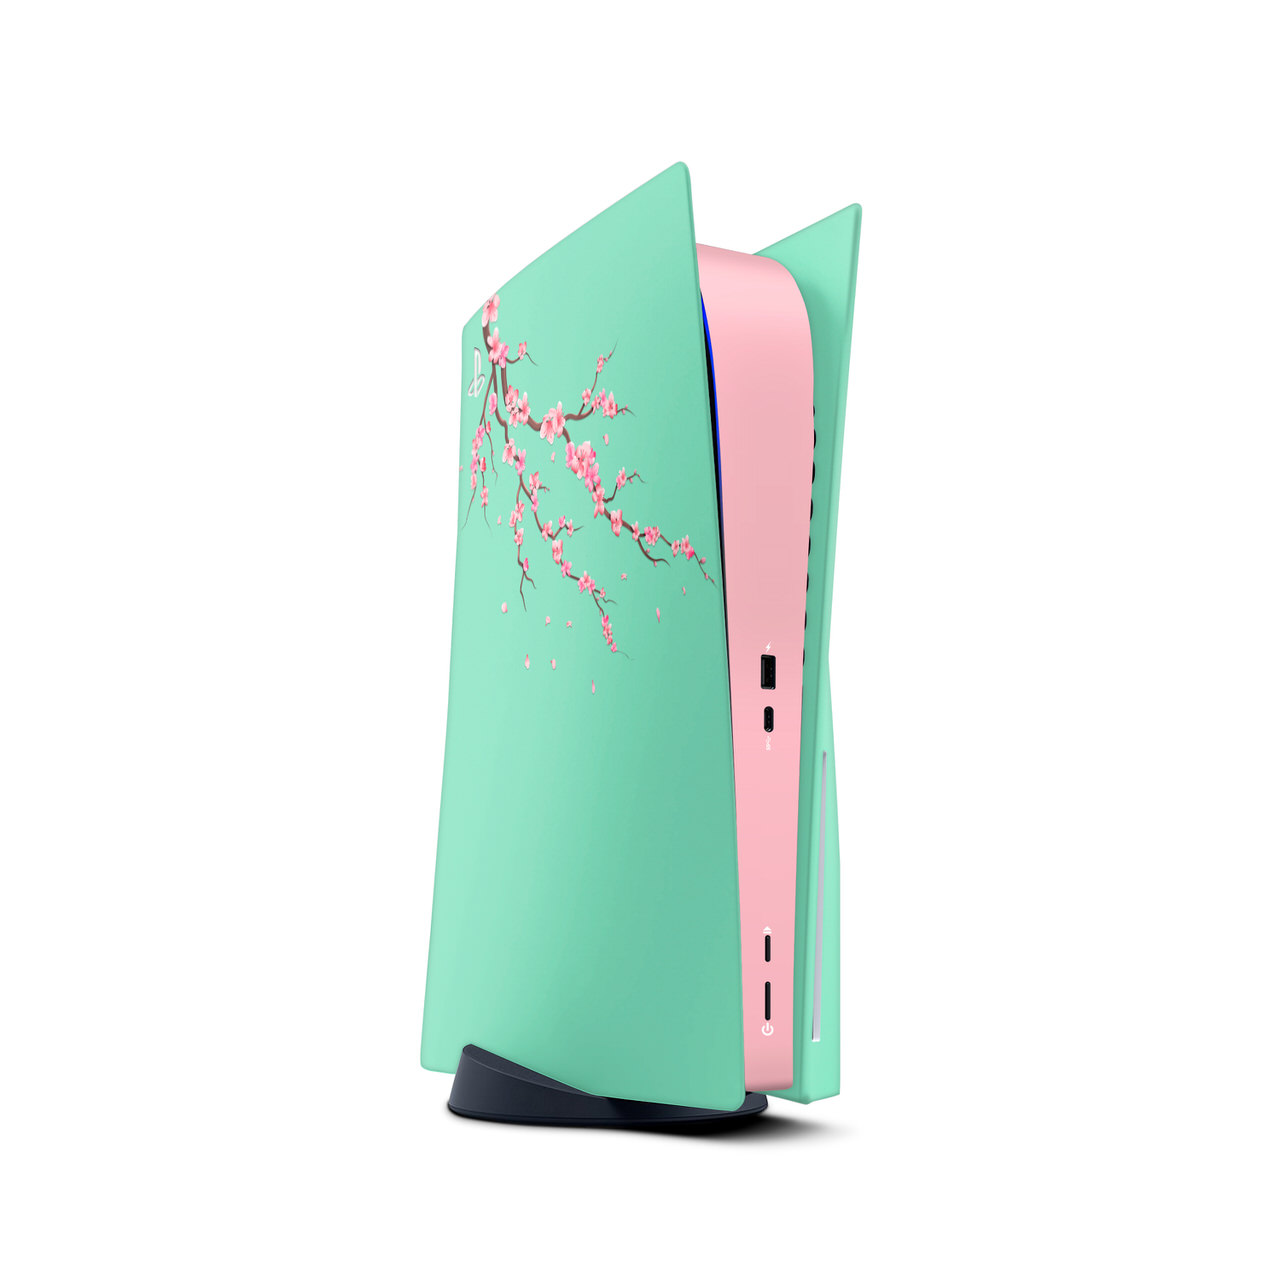 Mint Cherry Blossoms PlayStation 5 Skin